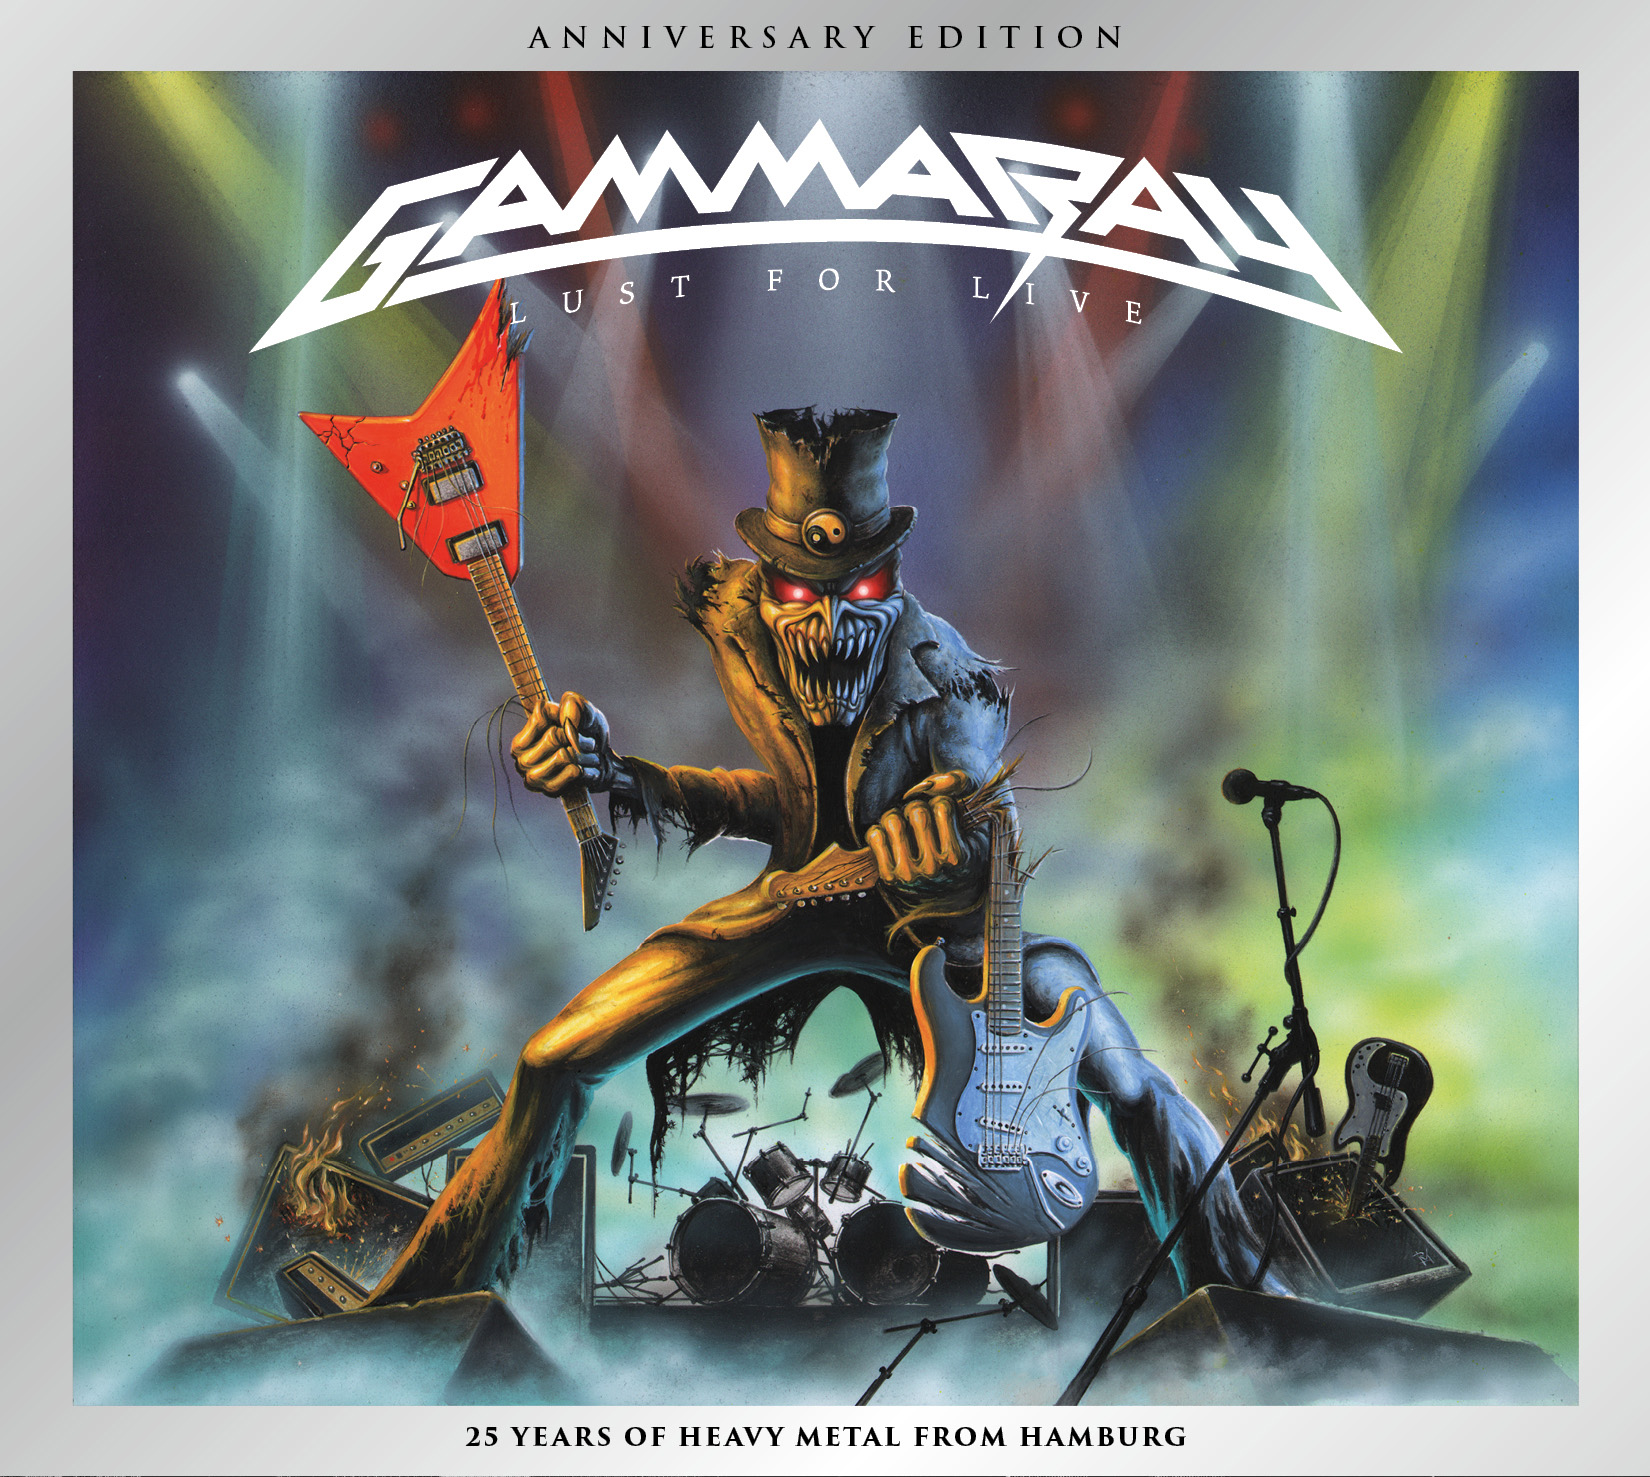 Gamma Ray - Lust For Live (Anniversary Edition) - CD